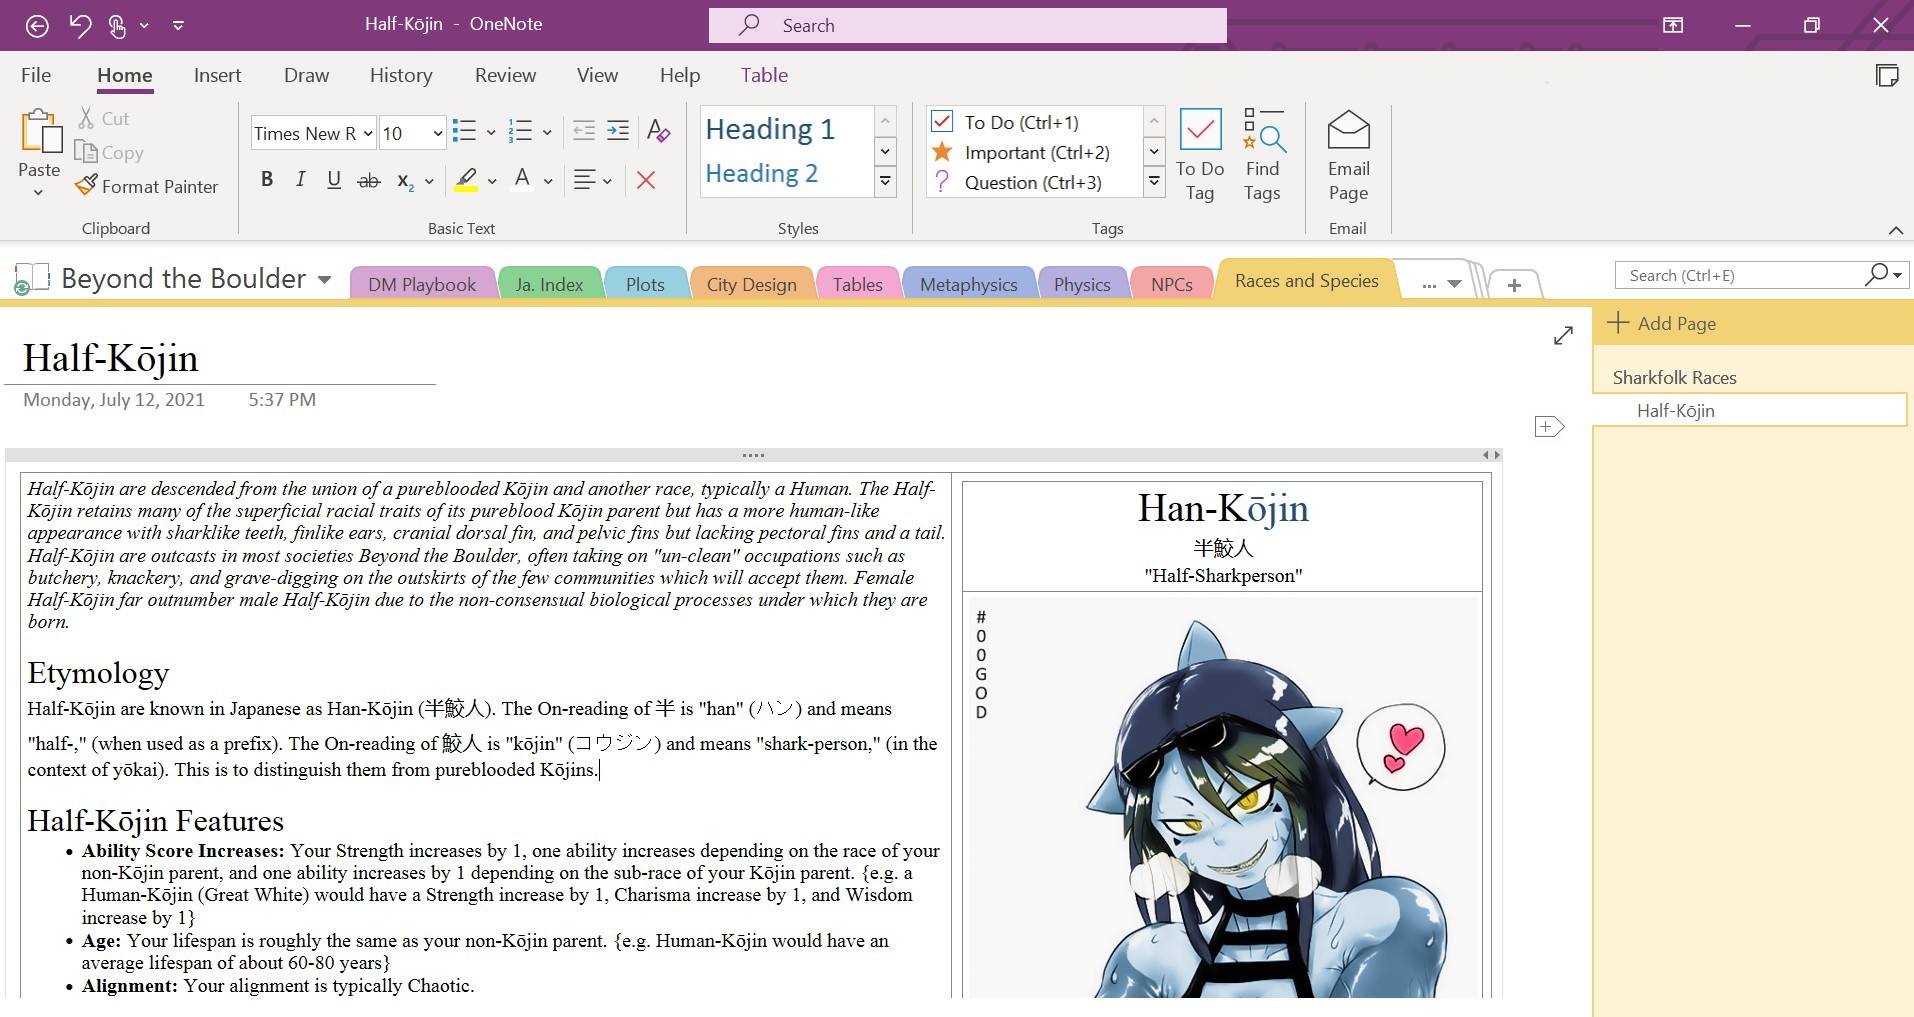 A wiki-like page in OneNote